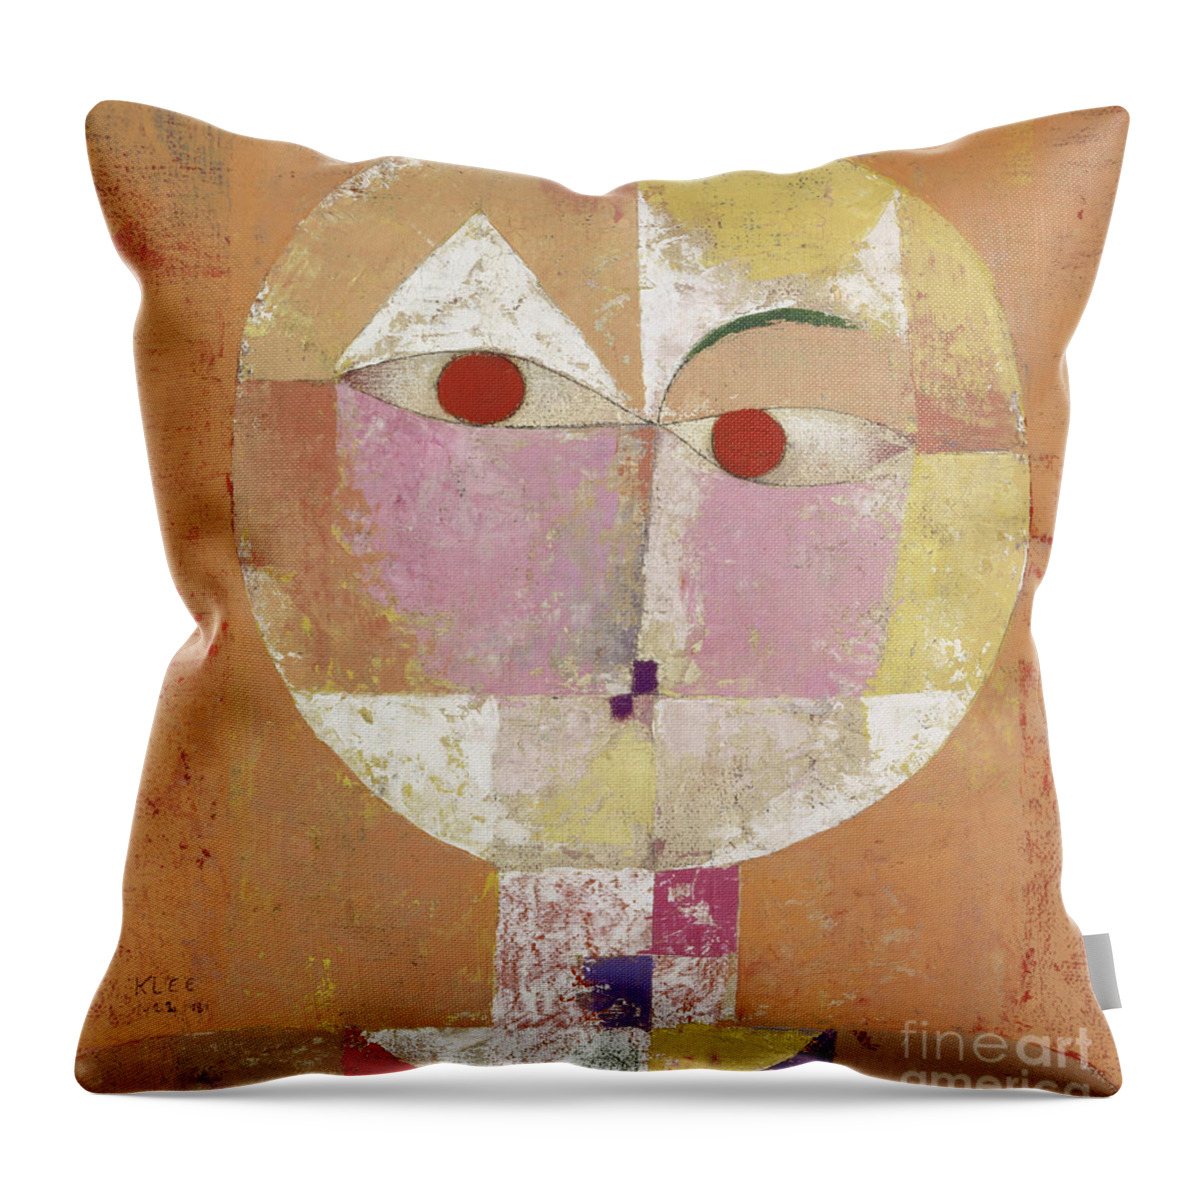 Paul Throw Pillow featuring the painting Senecio, 1922 by Paul Klee